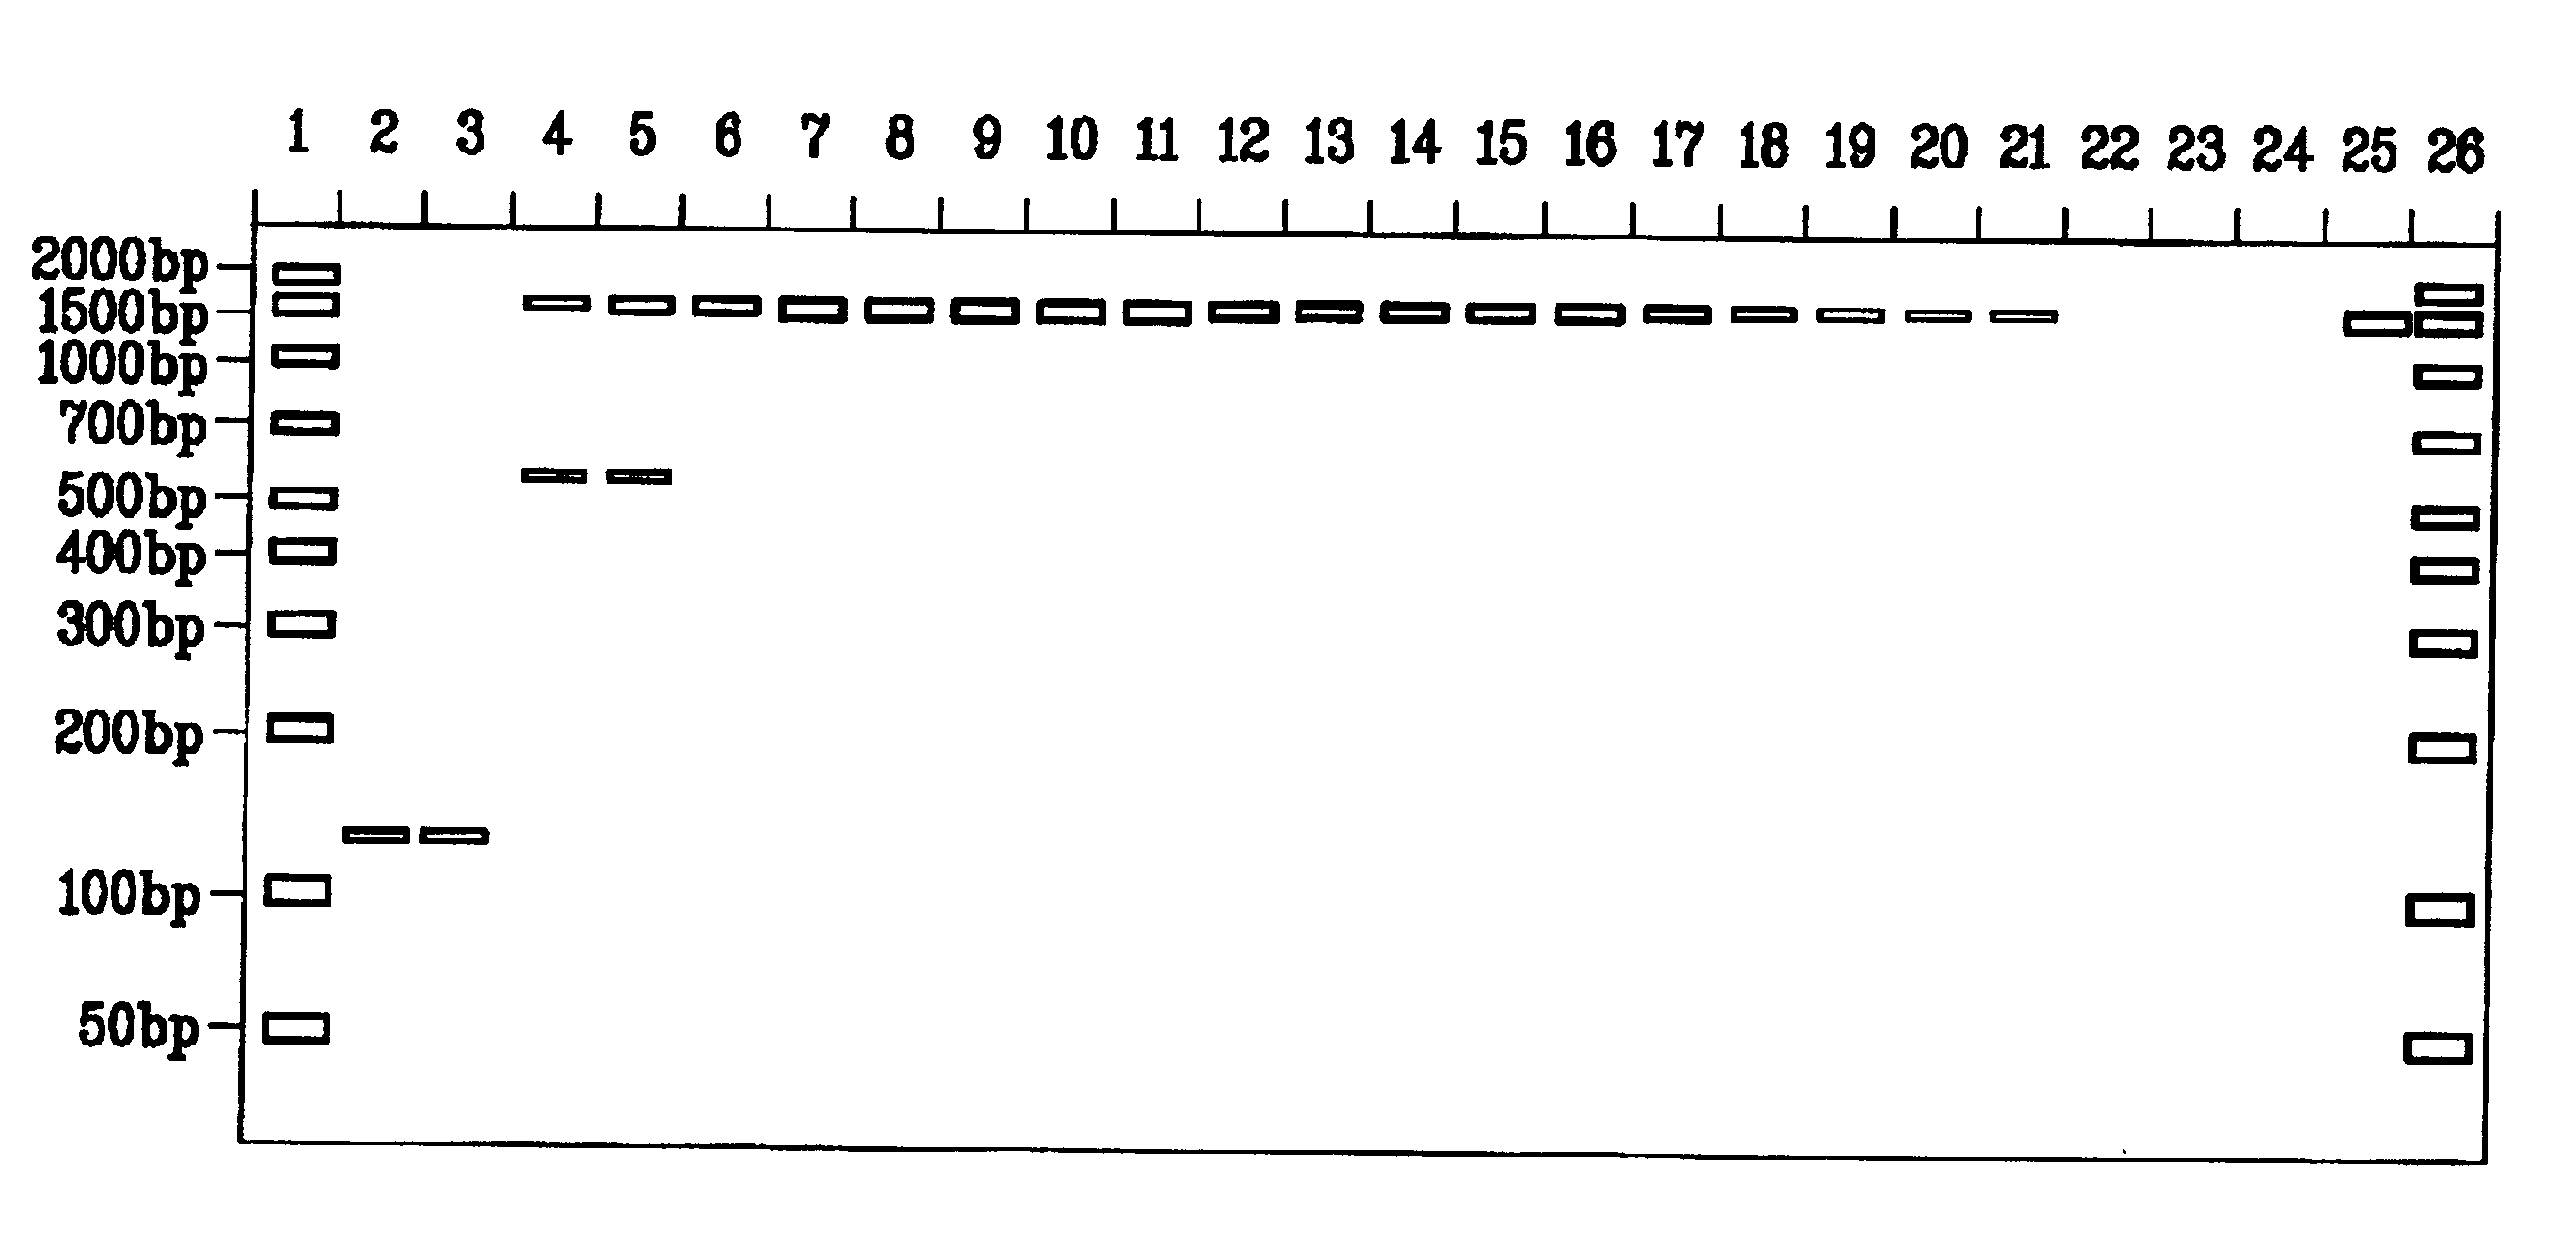 Method of reducing non-specific amplification in PCR